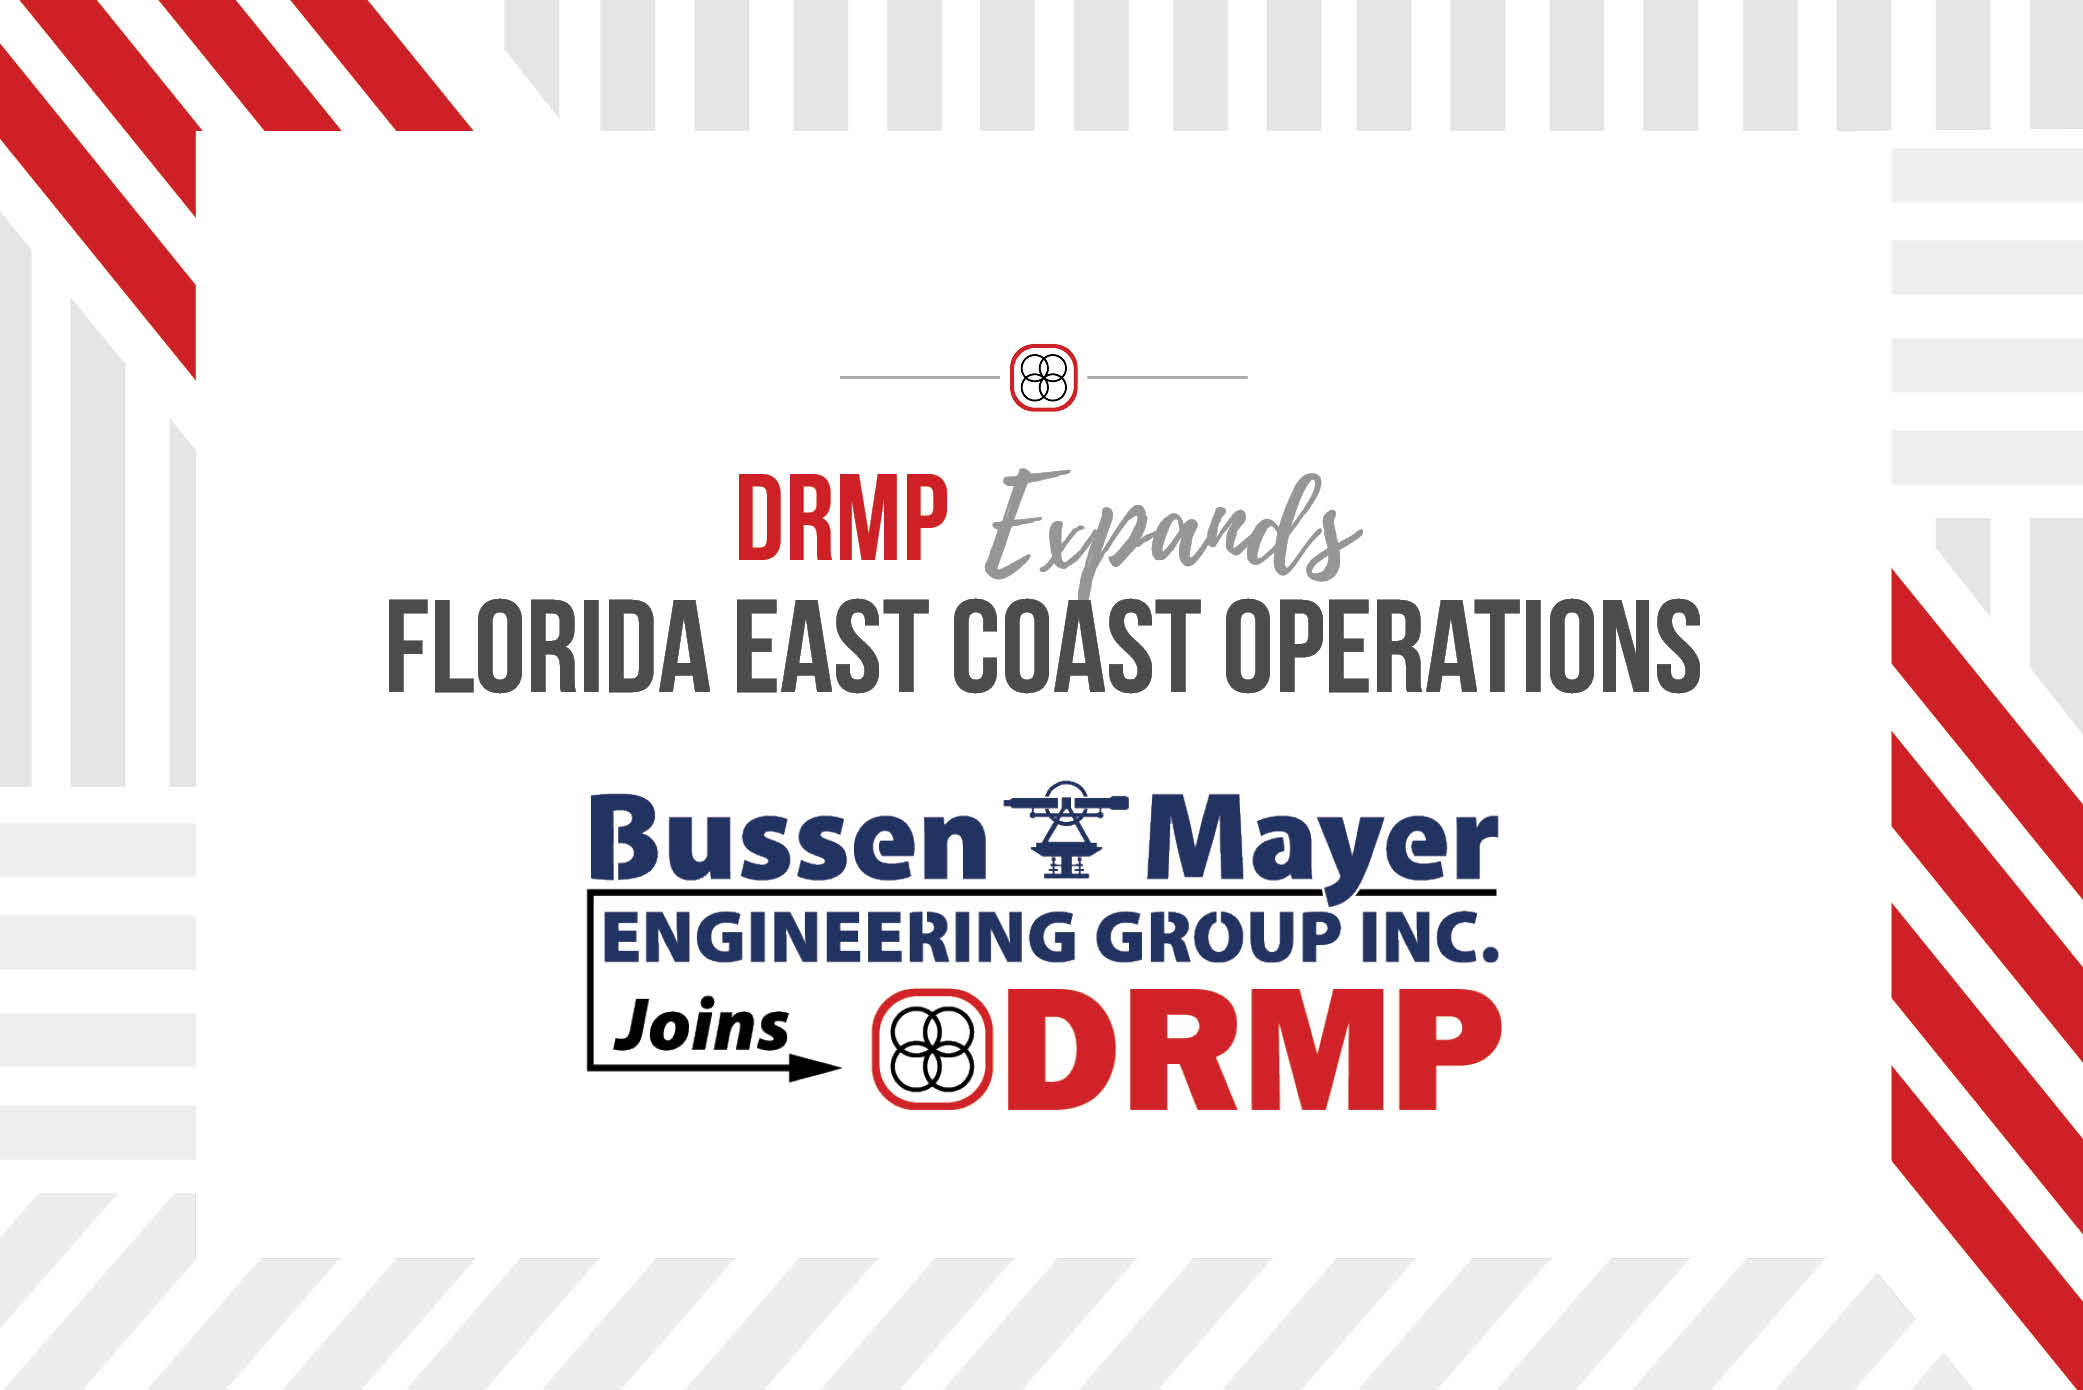 DRMP Expands Florida East Coast Operations with Acquisition